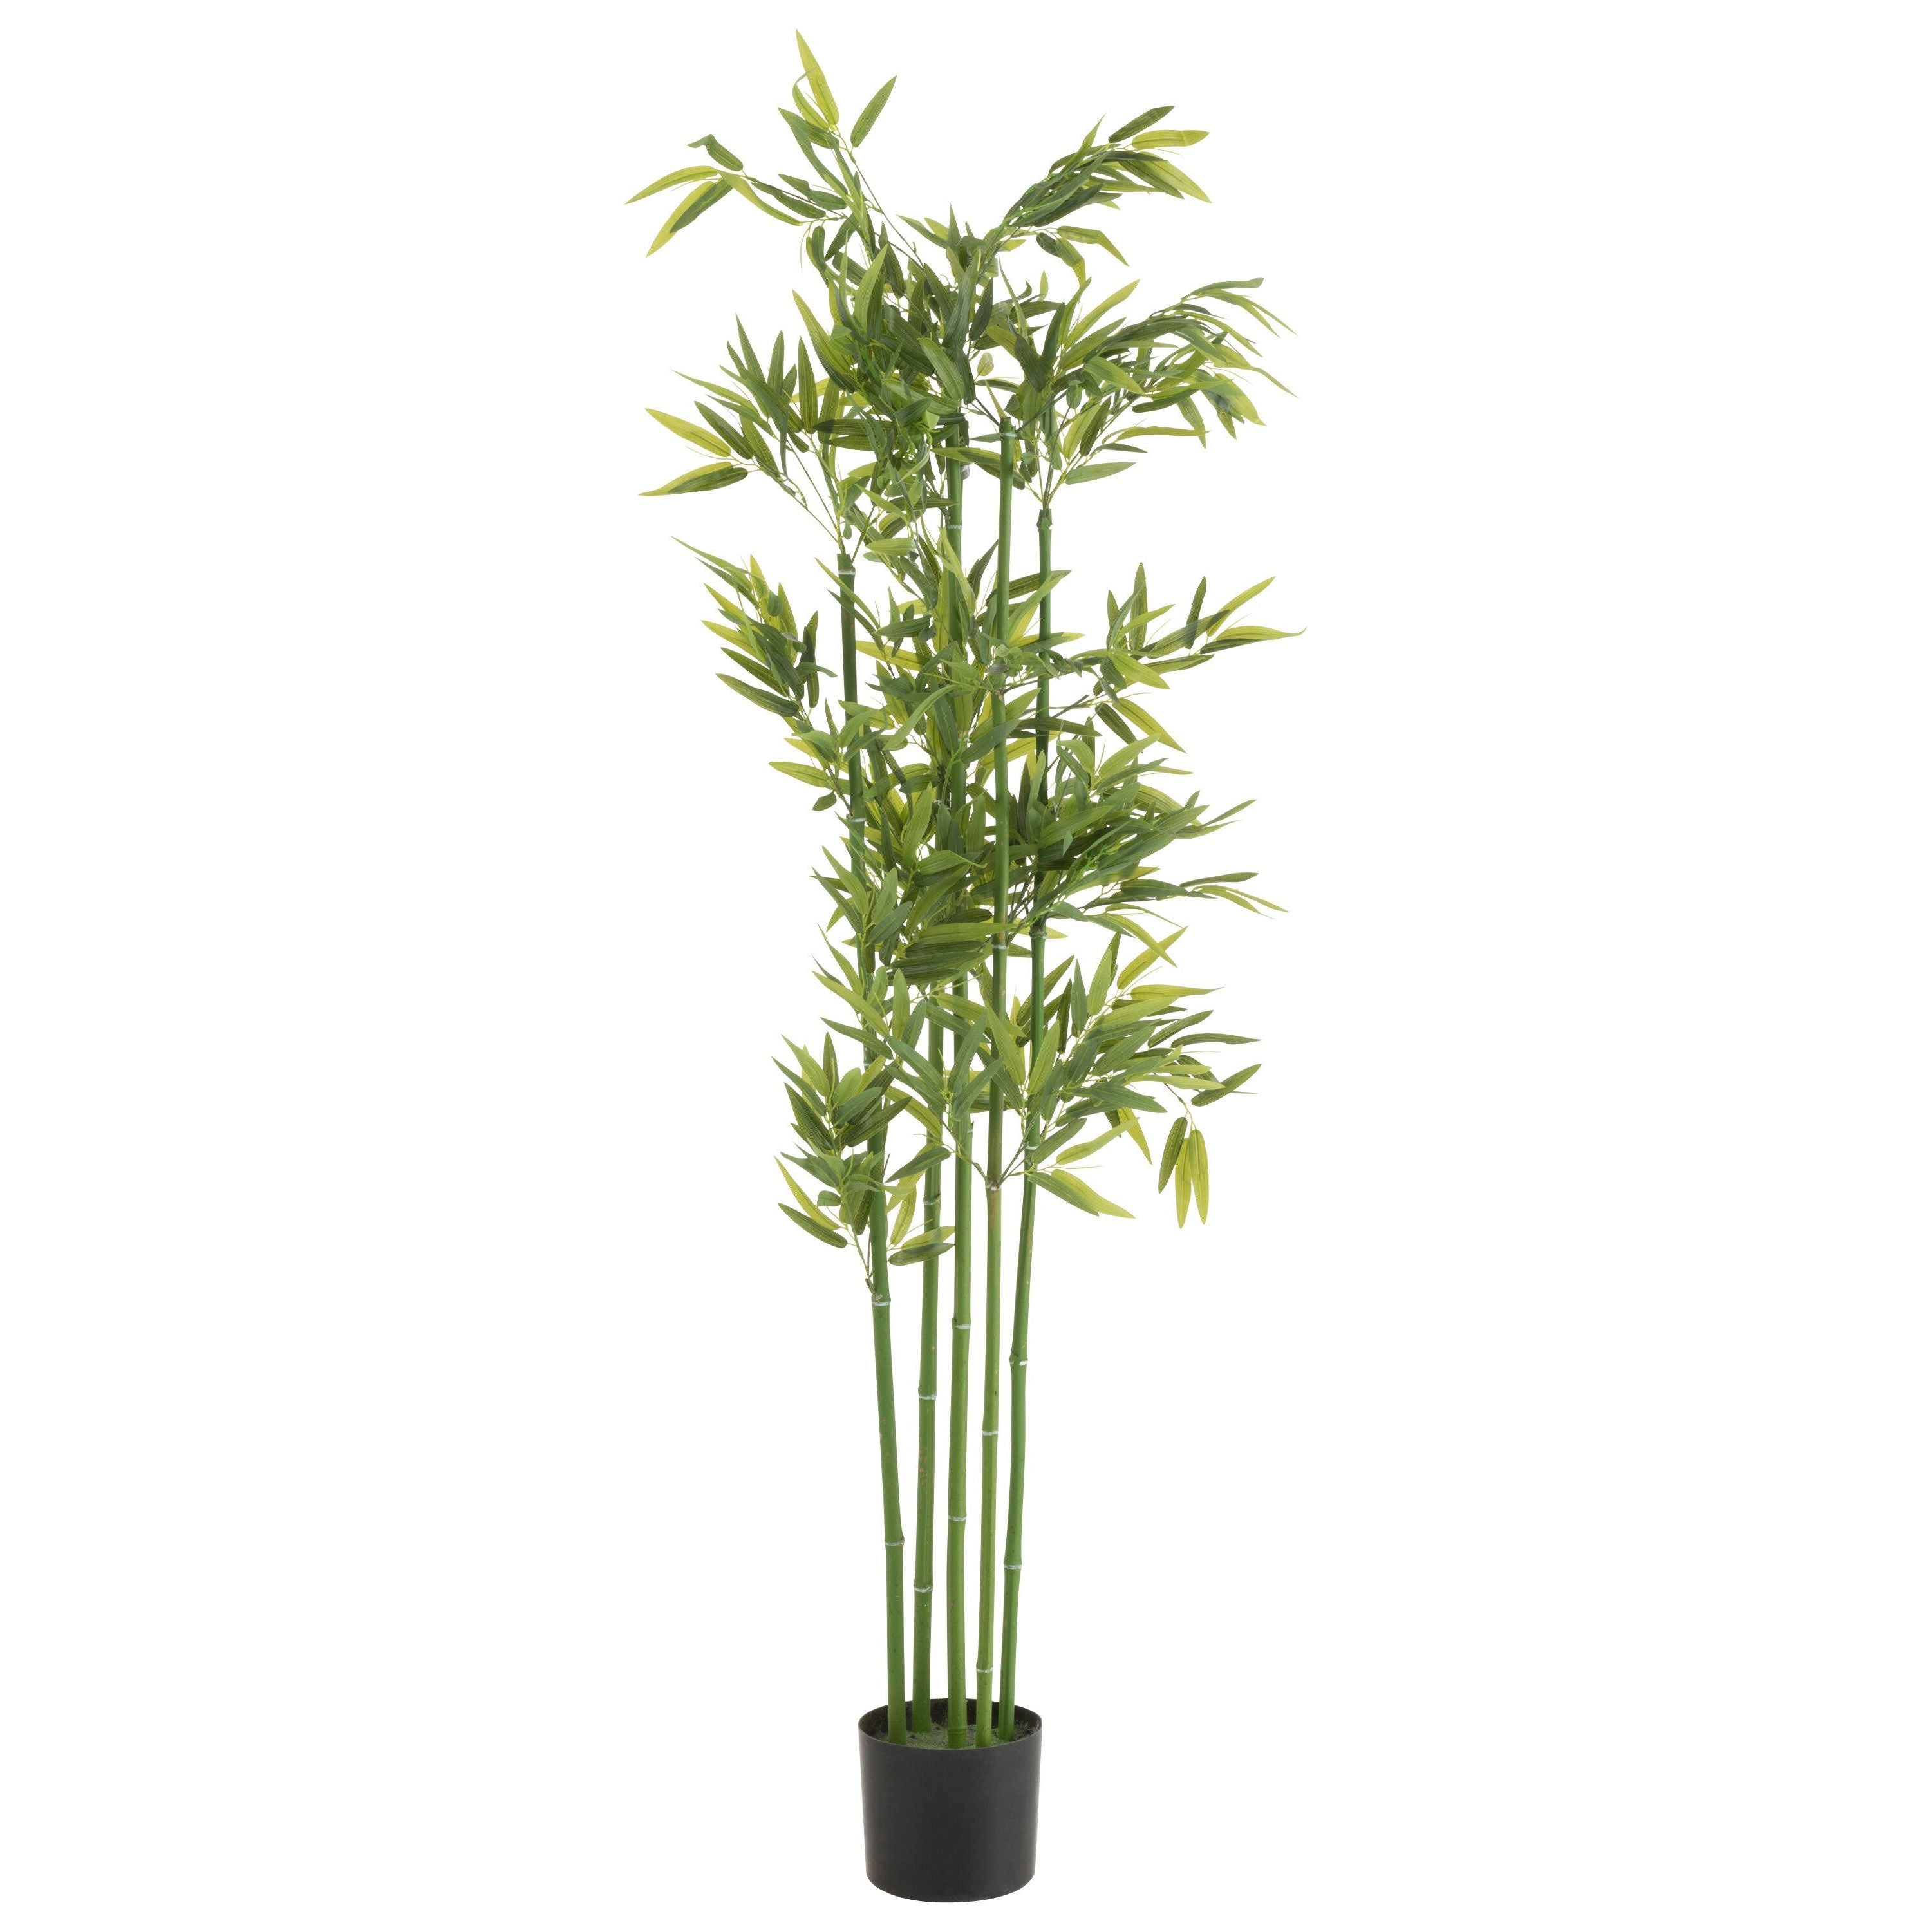 Bamboo In Pot Plastic Green Large